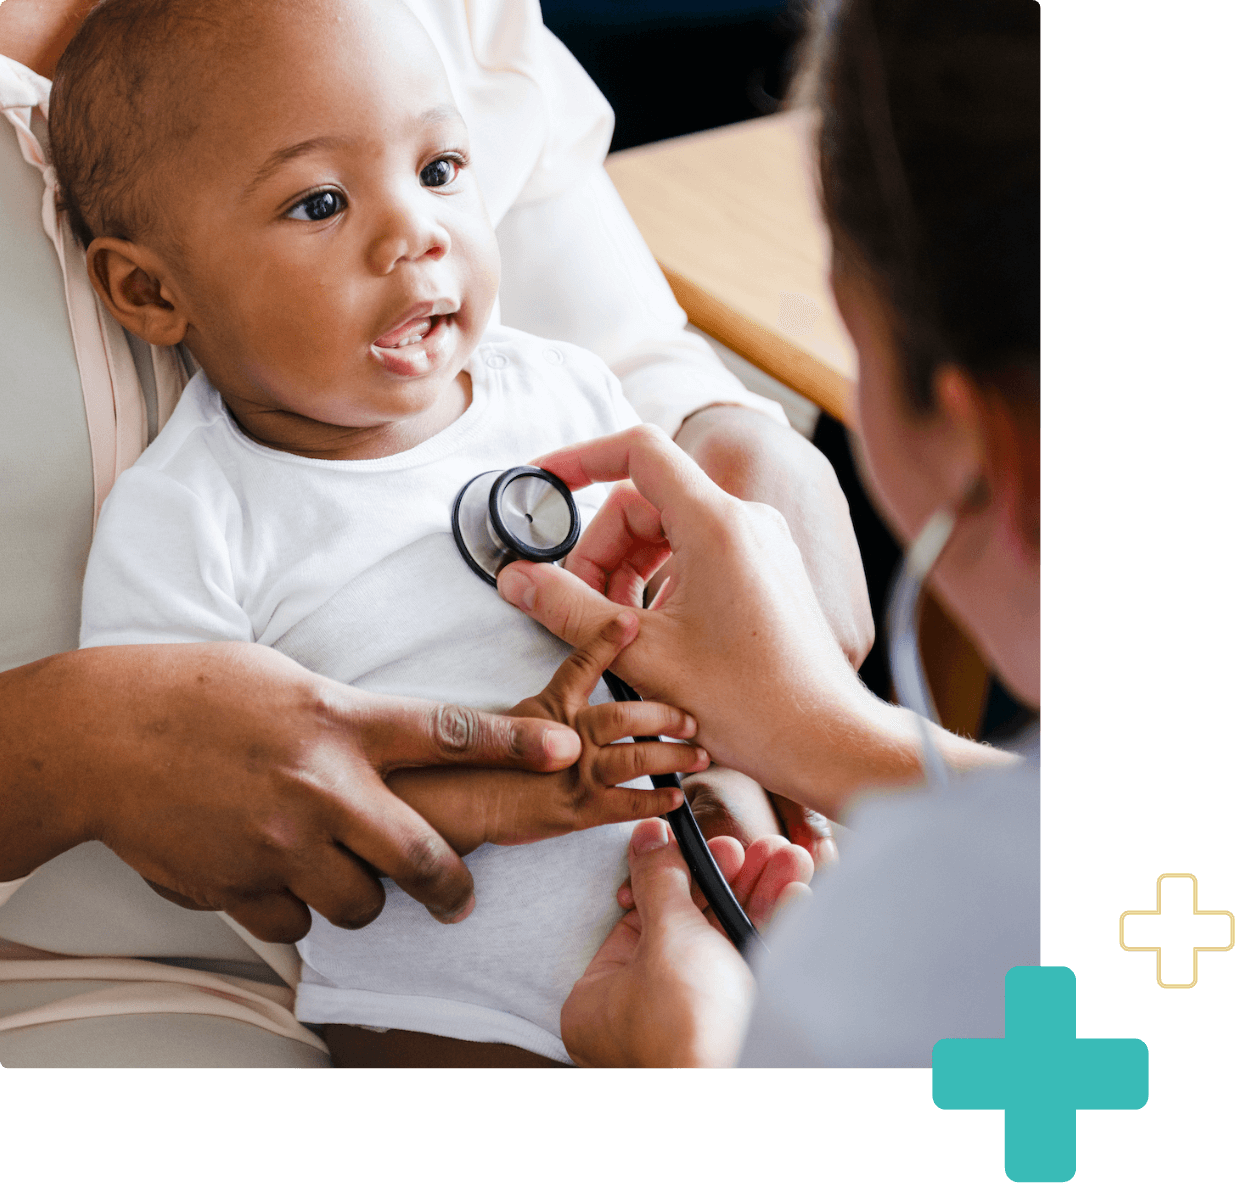 Hillcroft Physician's provider seeing a pediatric patient